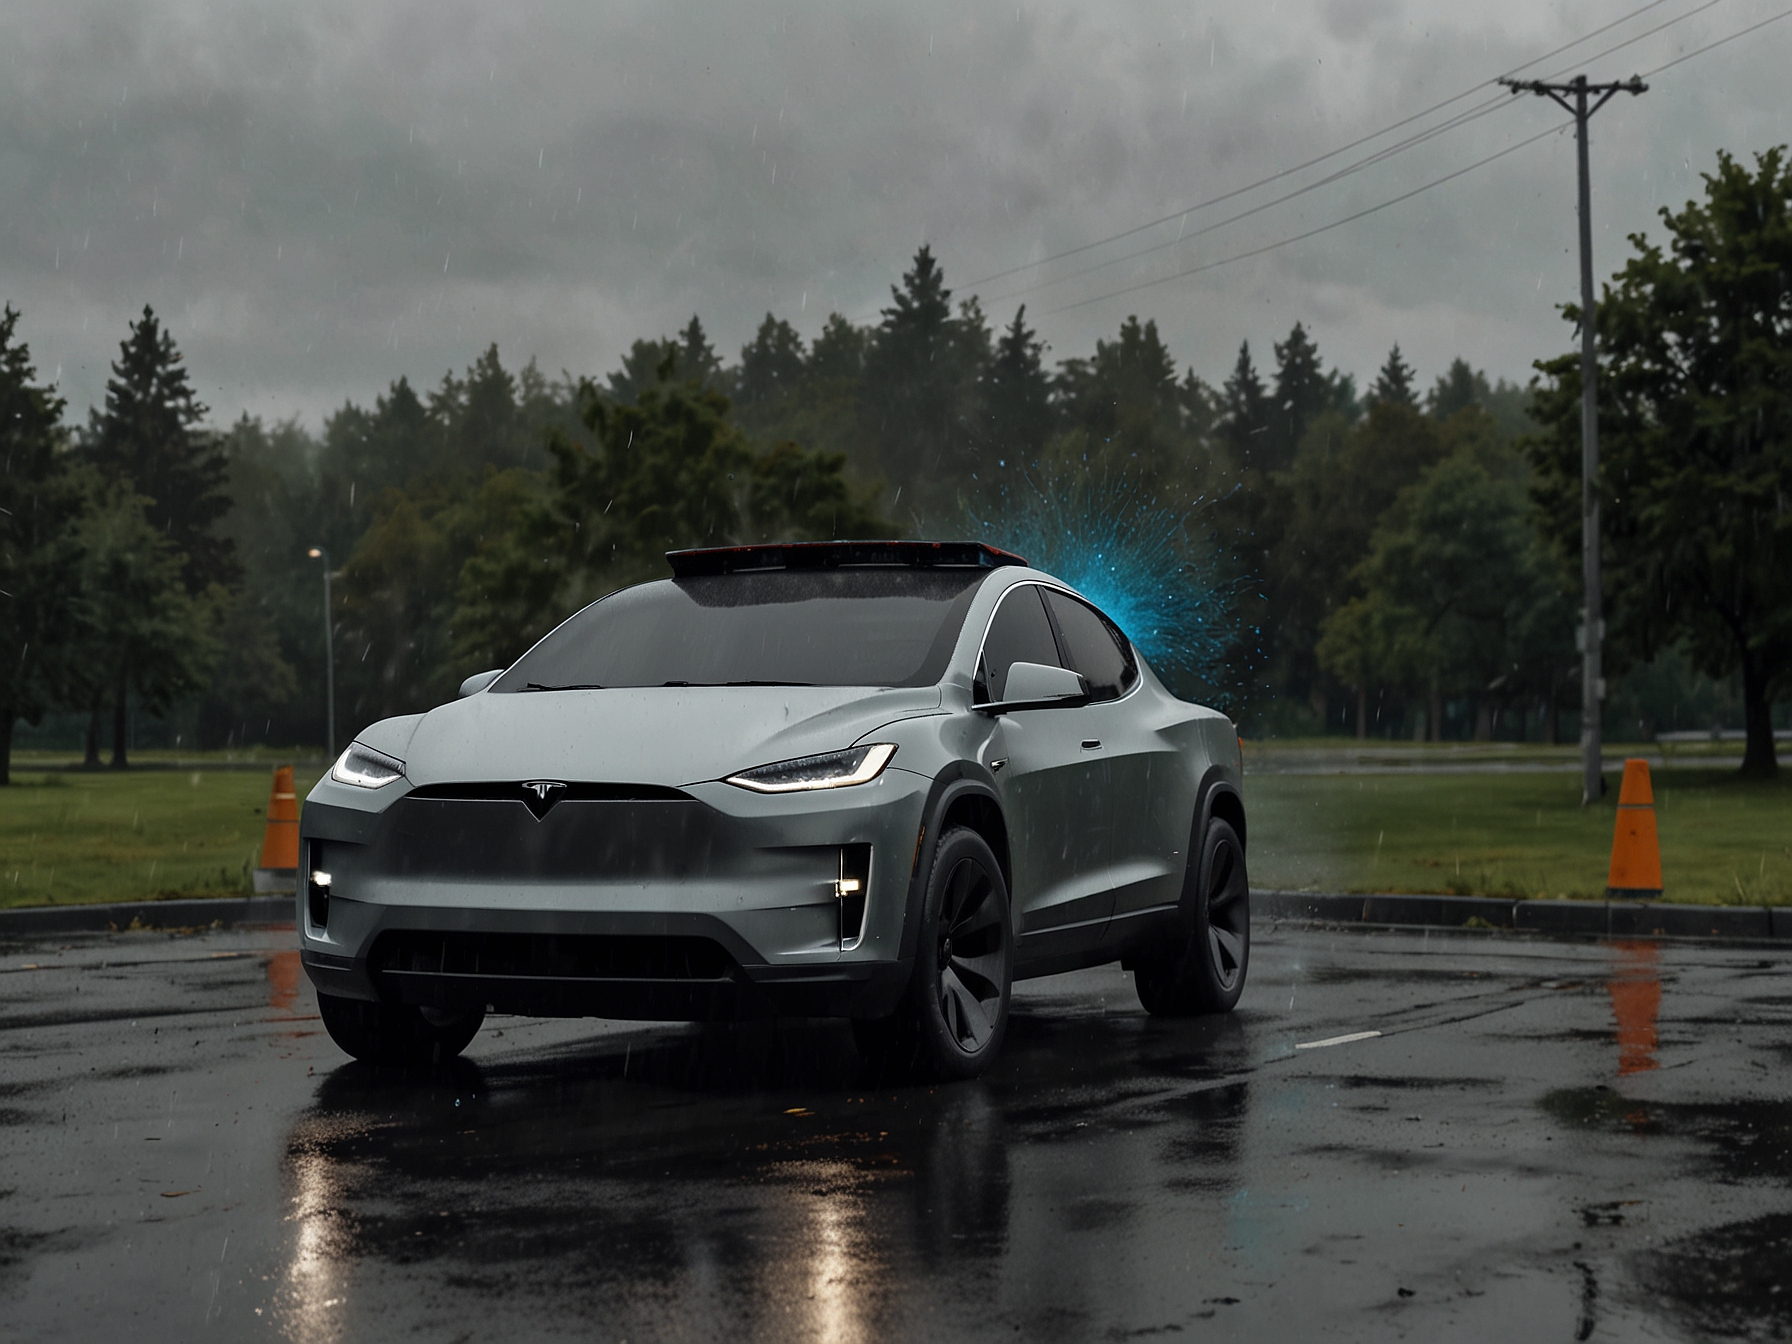 A visual of the Tesla Cybertruck on a rainy day, demonstrating the importance of functional windshield wipers for driver visibility and road safety, which are currently under recall.